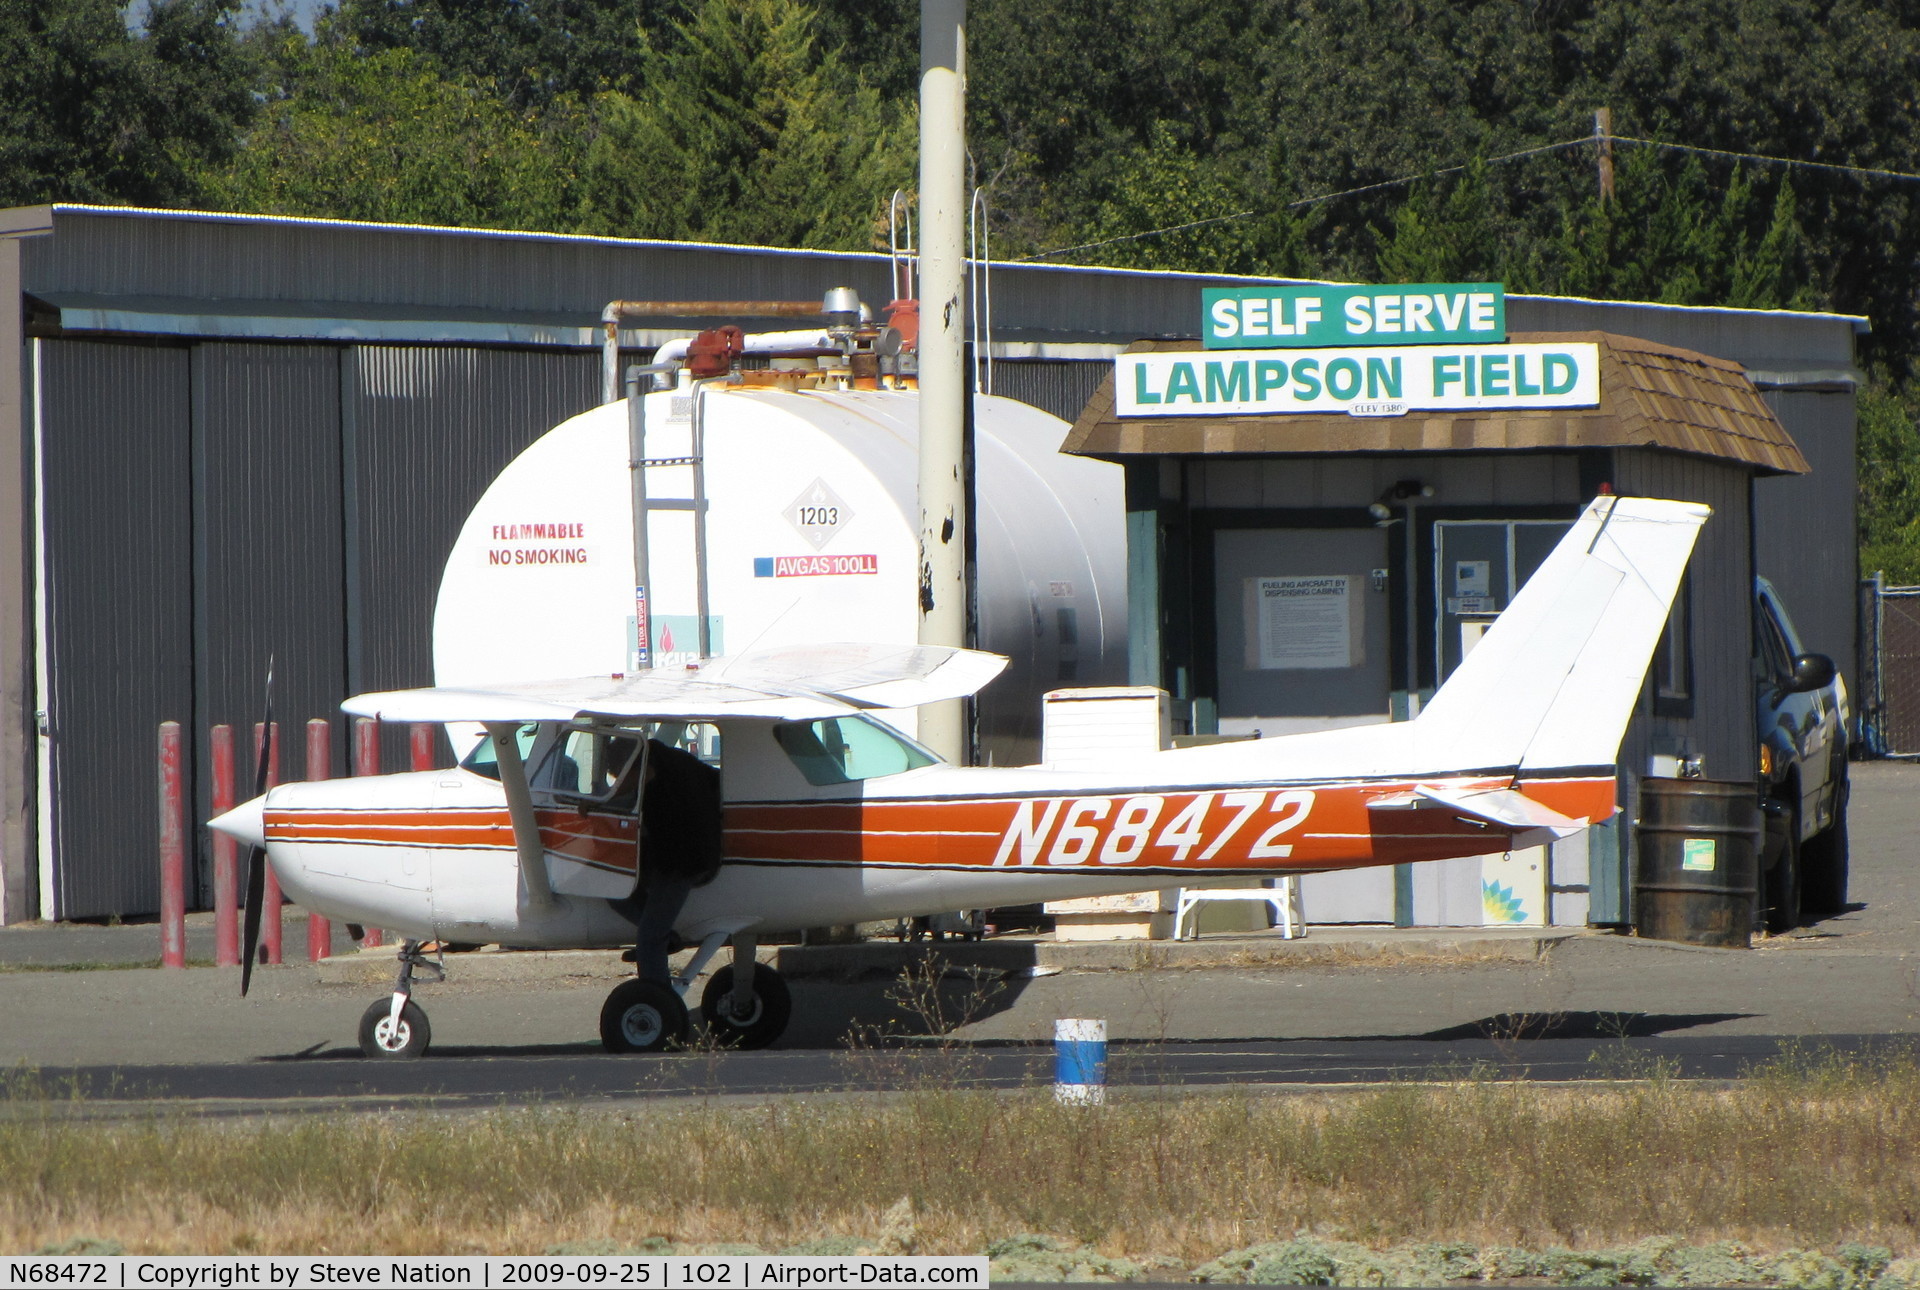 N68472, 1978 Cessna 152 C/N 15282308, Christiansen Aviation 1978 Cessna 152 gassing up at self serve POL line @ Lampson Field